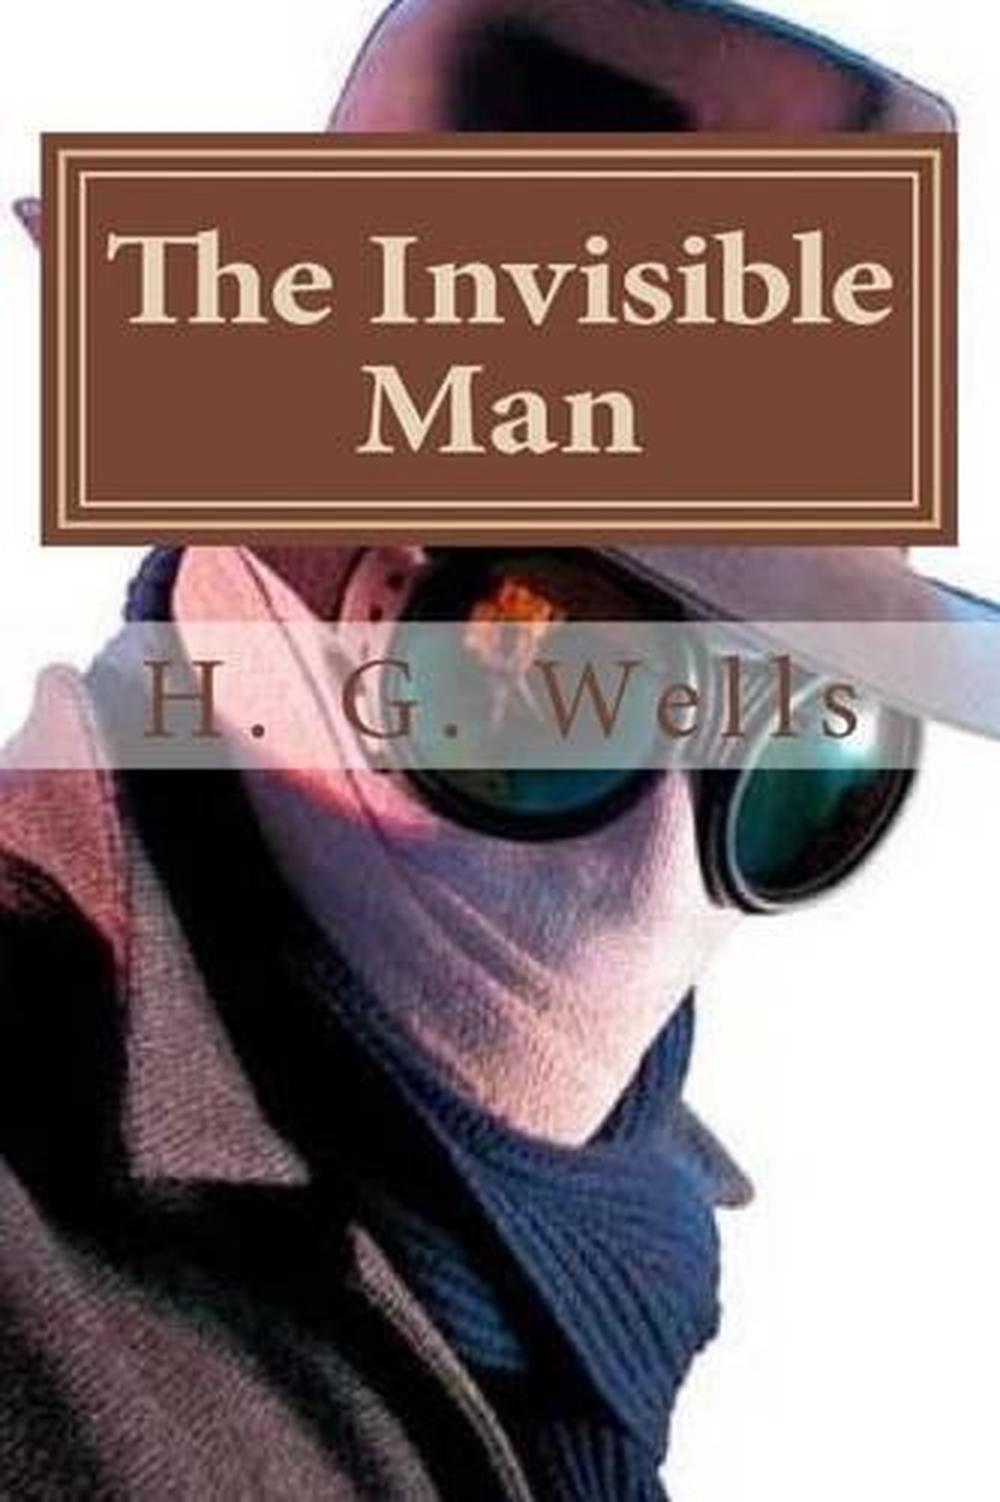 the invisible man by hg wells book